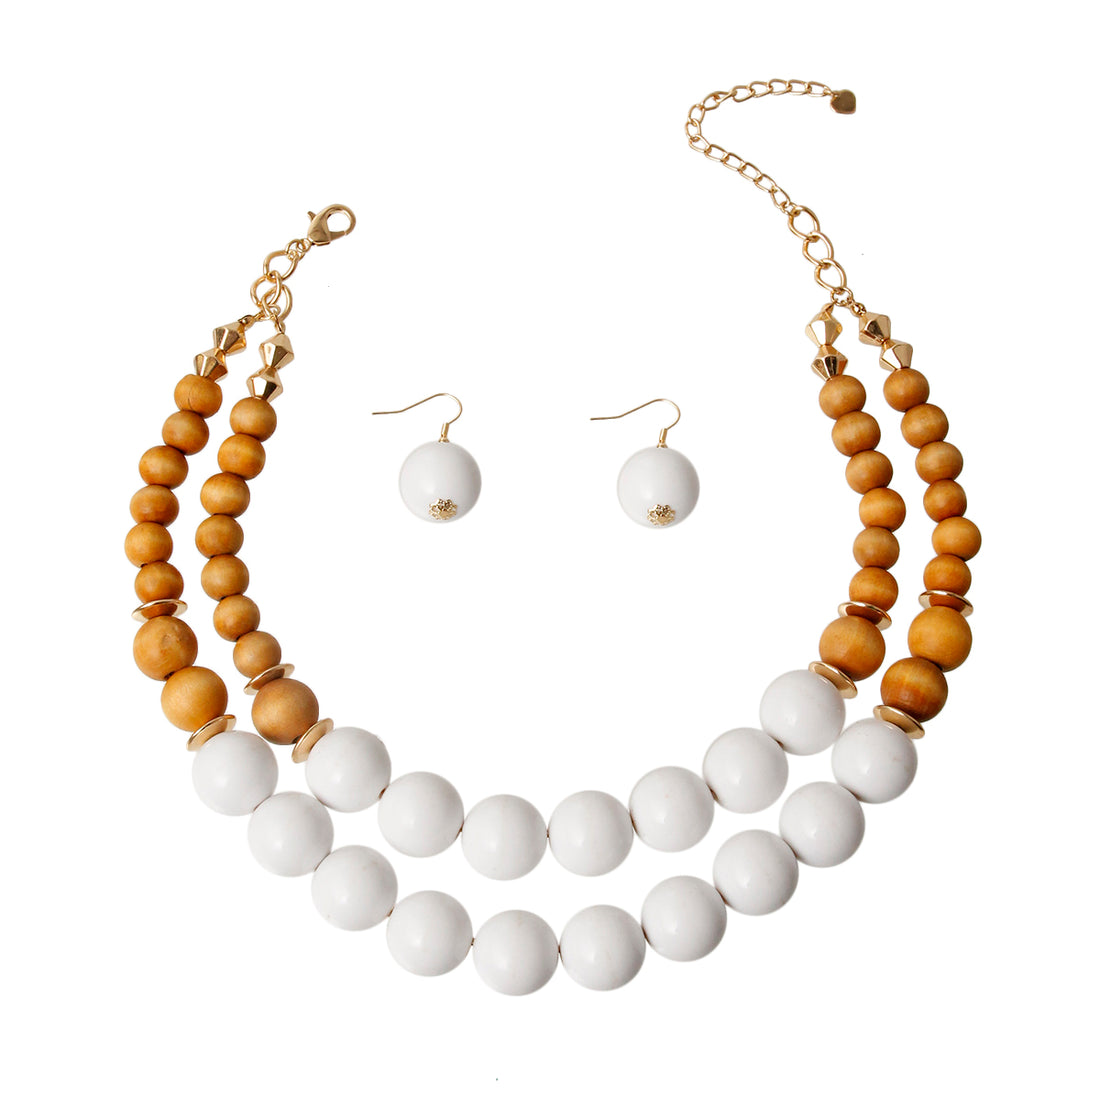 Wooden Bead Necklace Set